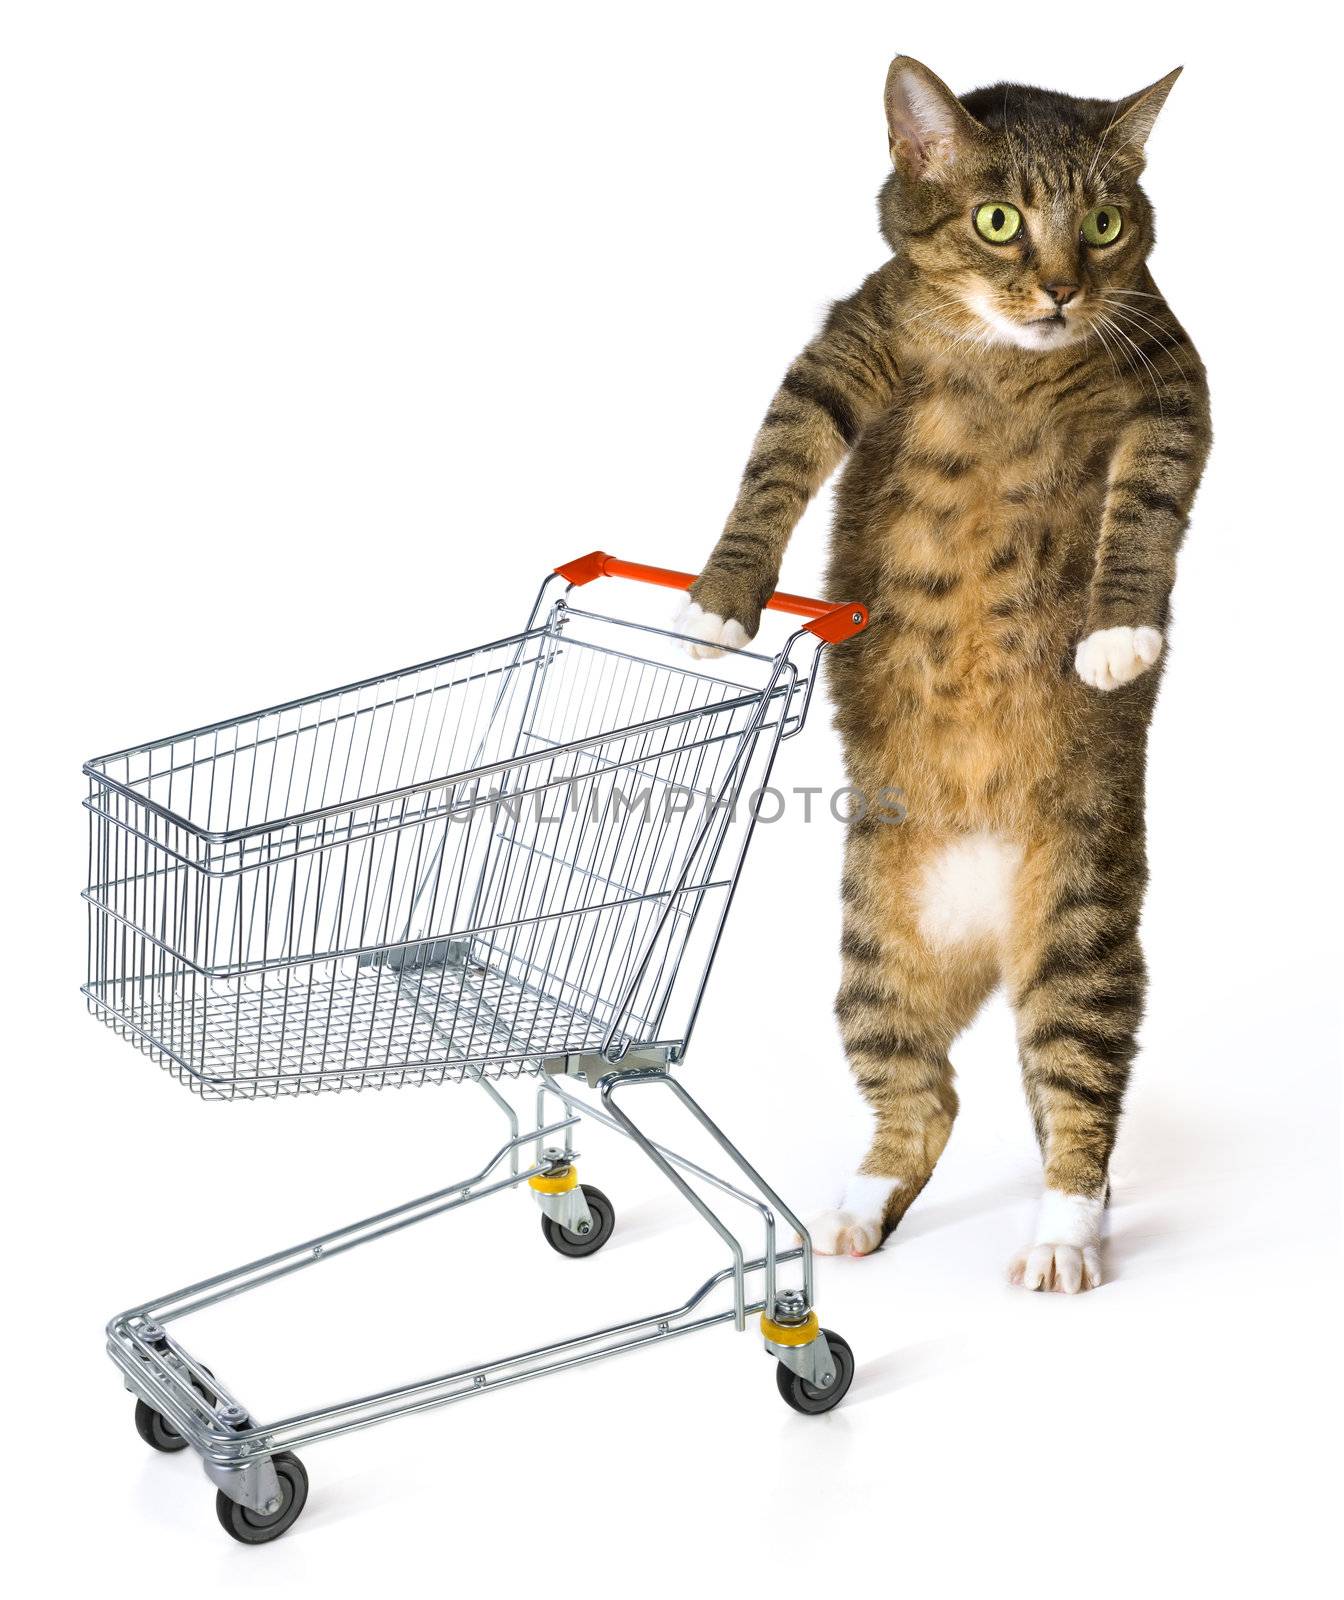 consumer cat with shopping cart on white background